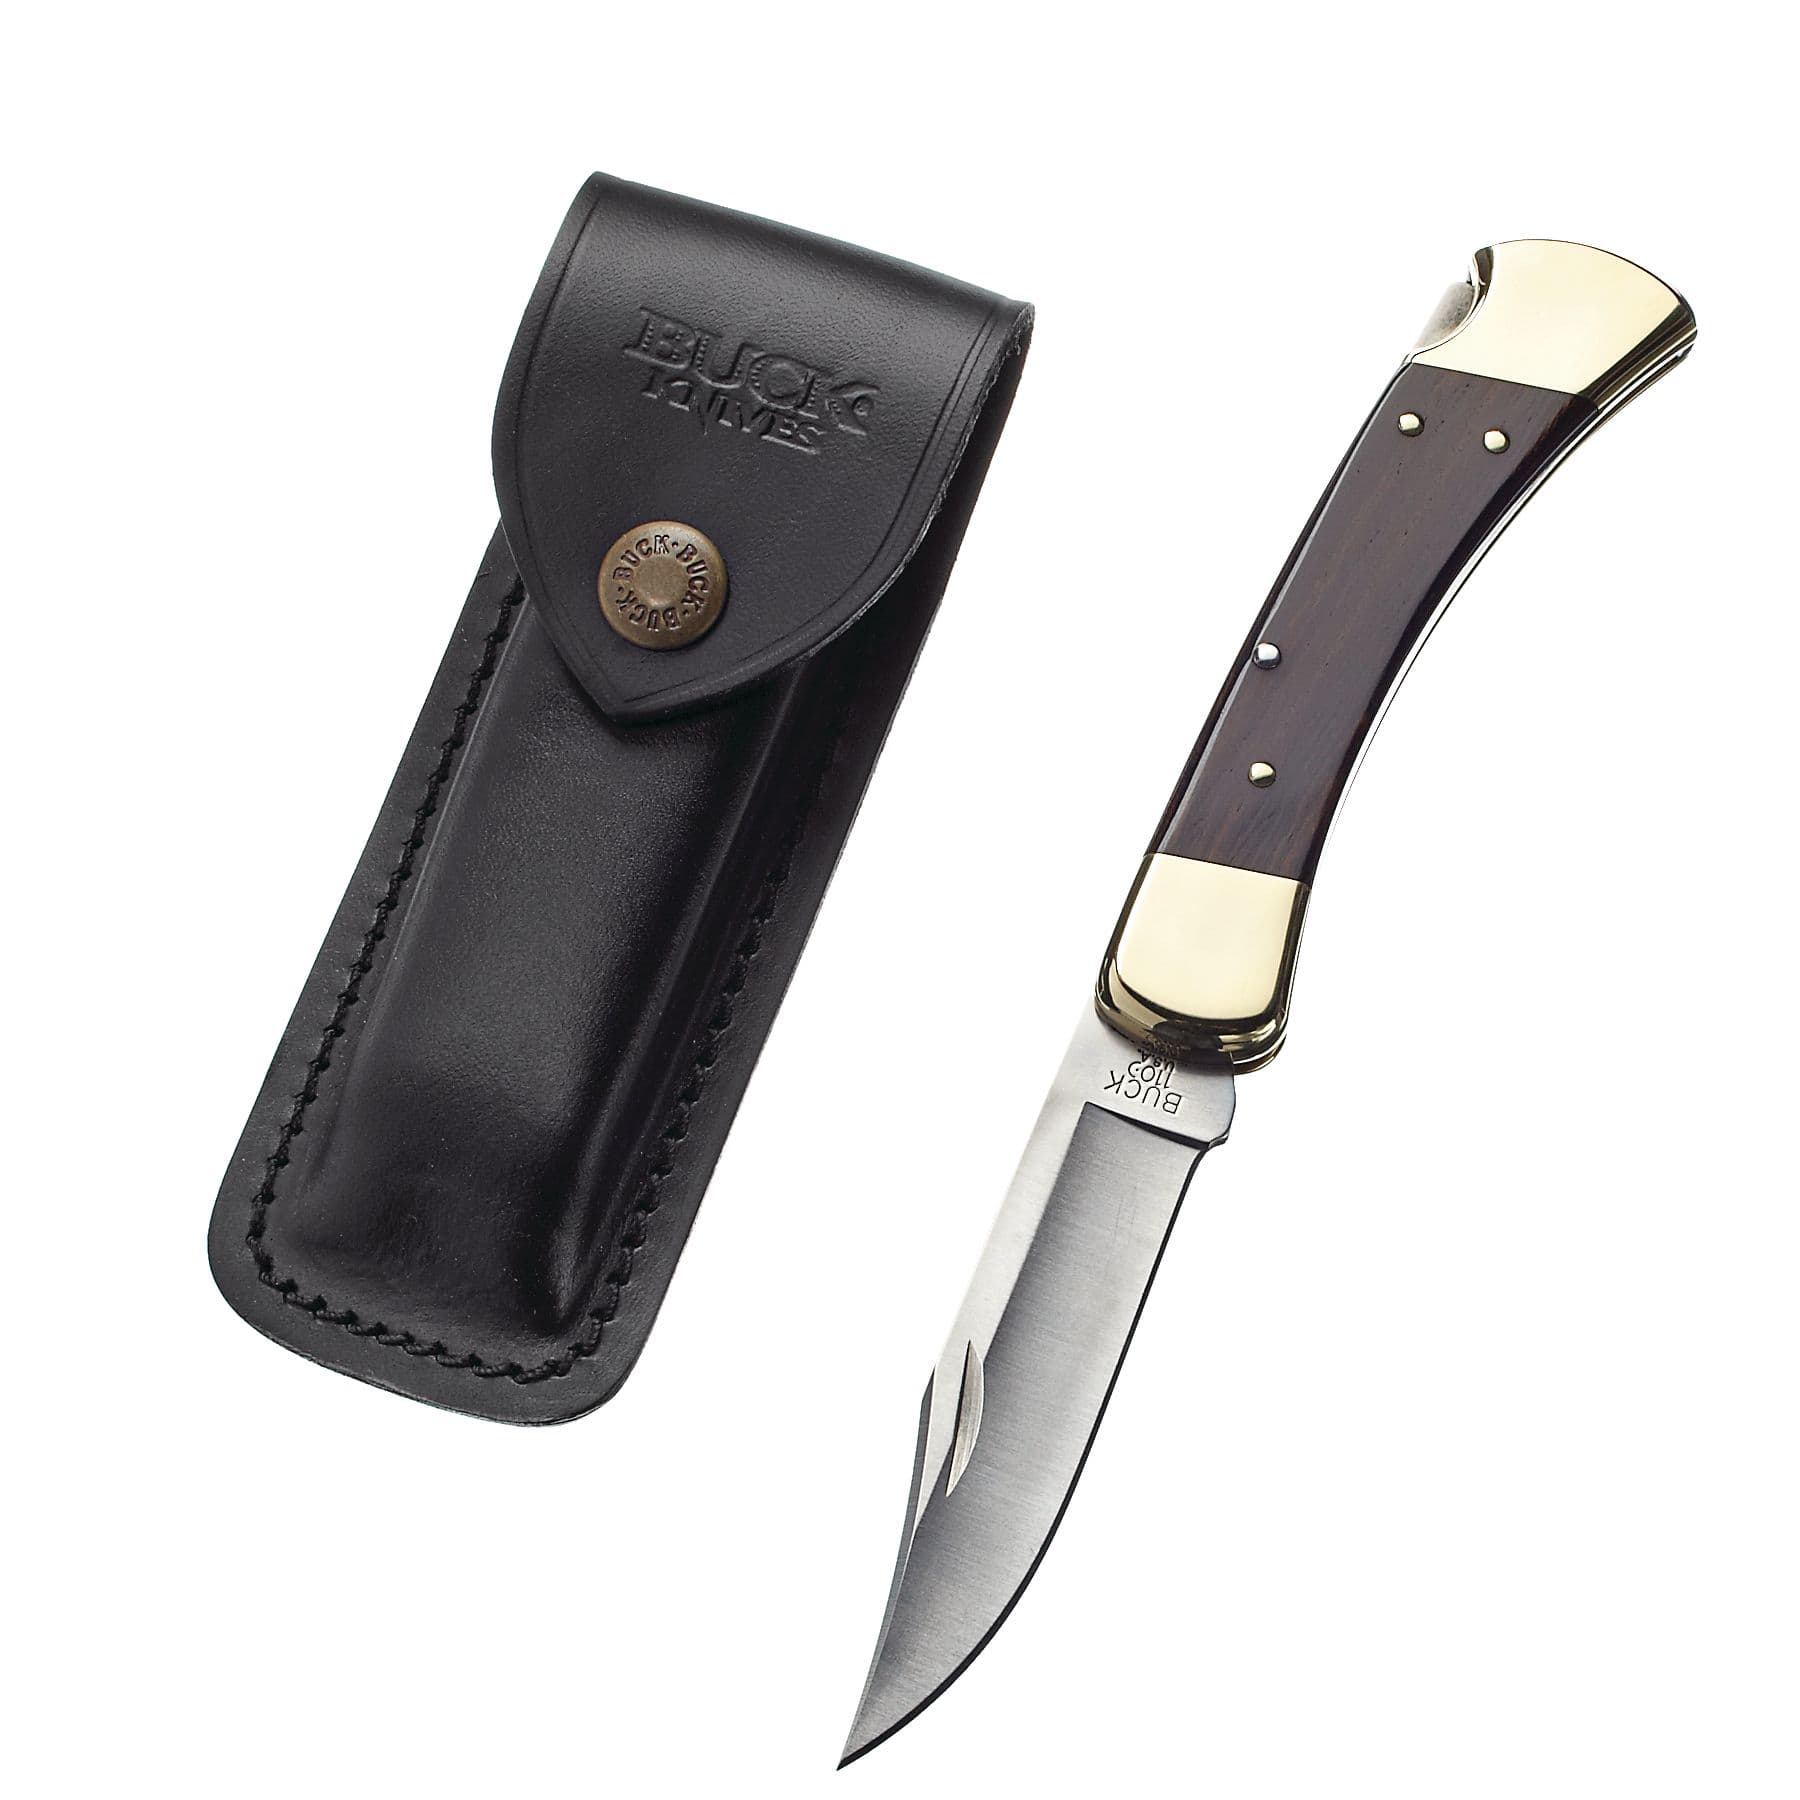 https://media-www.canadiantire.ca/product/playing/hunting/hunting-equipment/0756061/buck-110-folding-knife-0b2c31db-06d5-44ee-9d0e-a2252f0544e5-jpgrendition.jpg